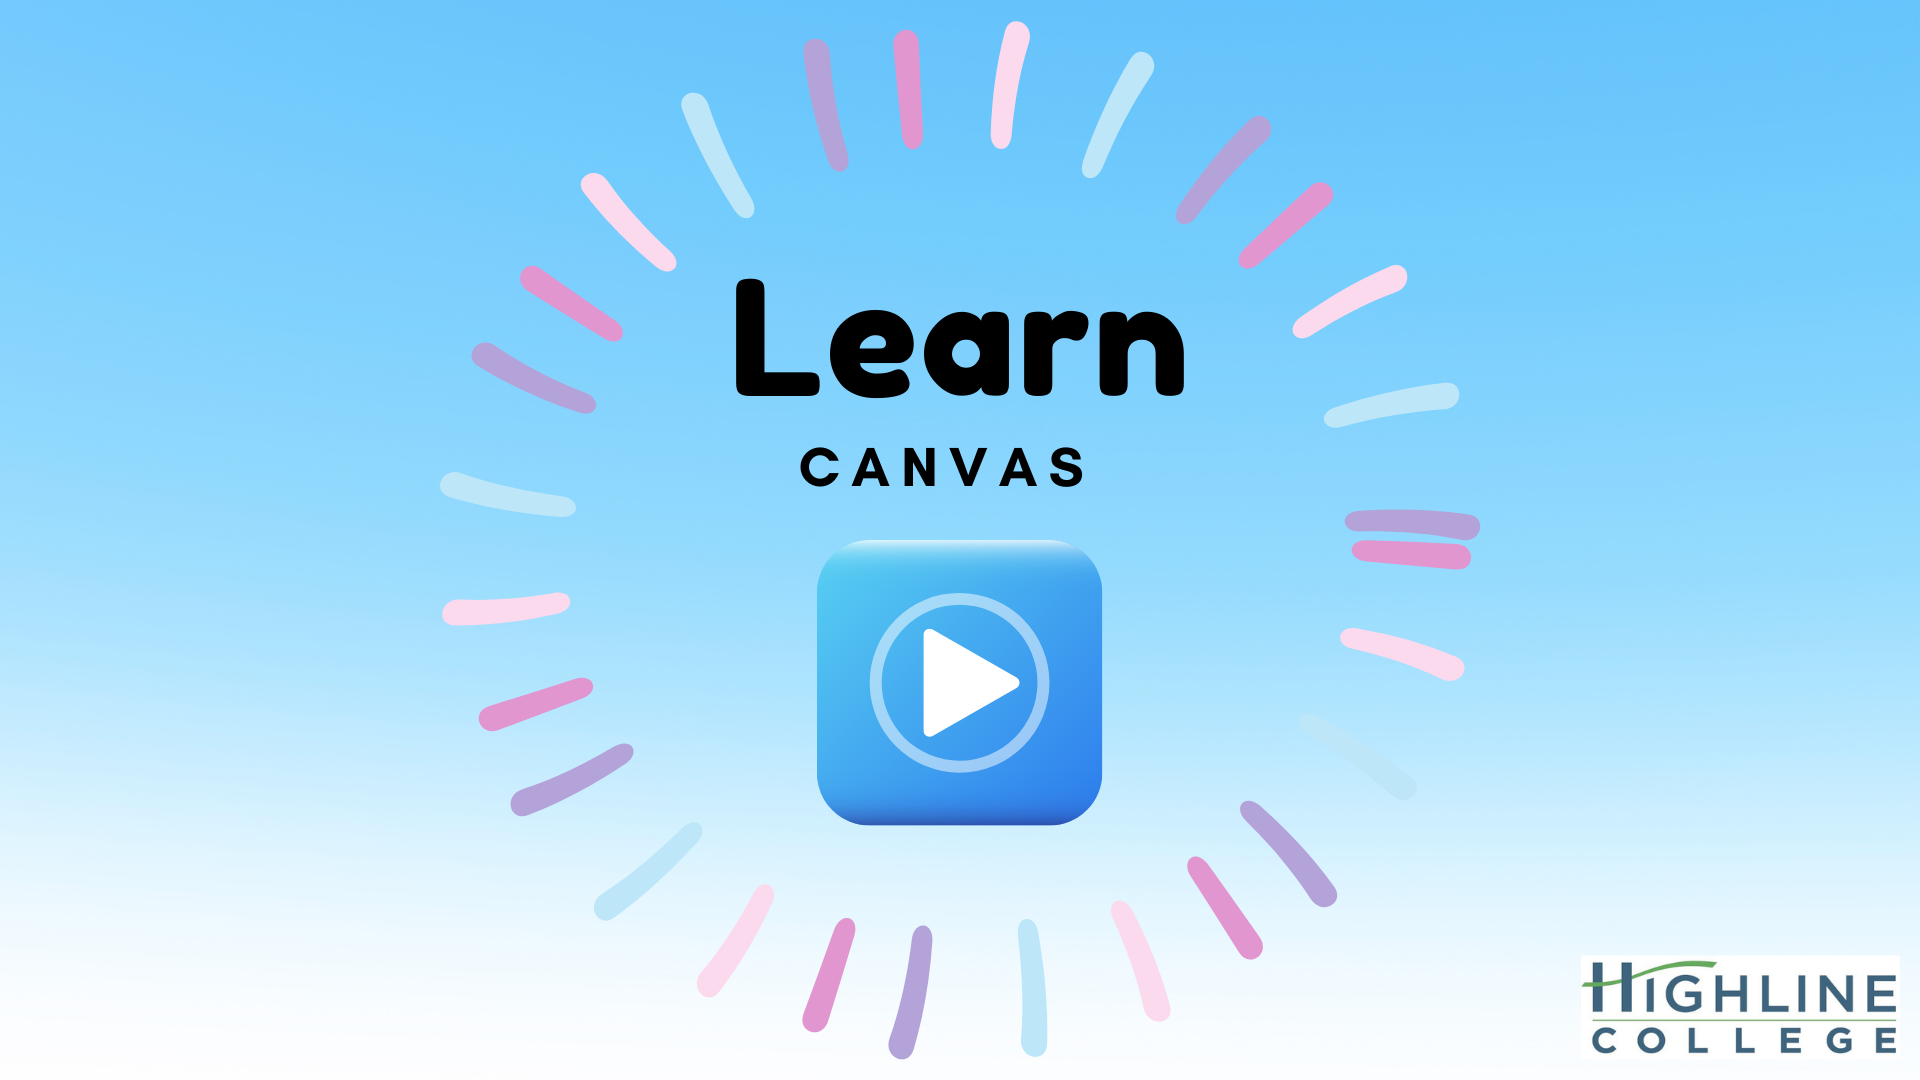 Learn about canvas